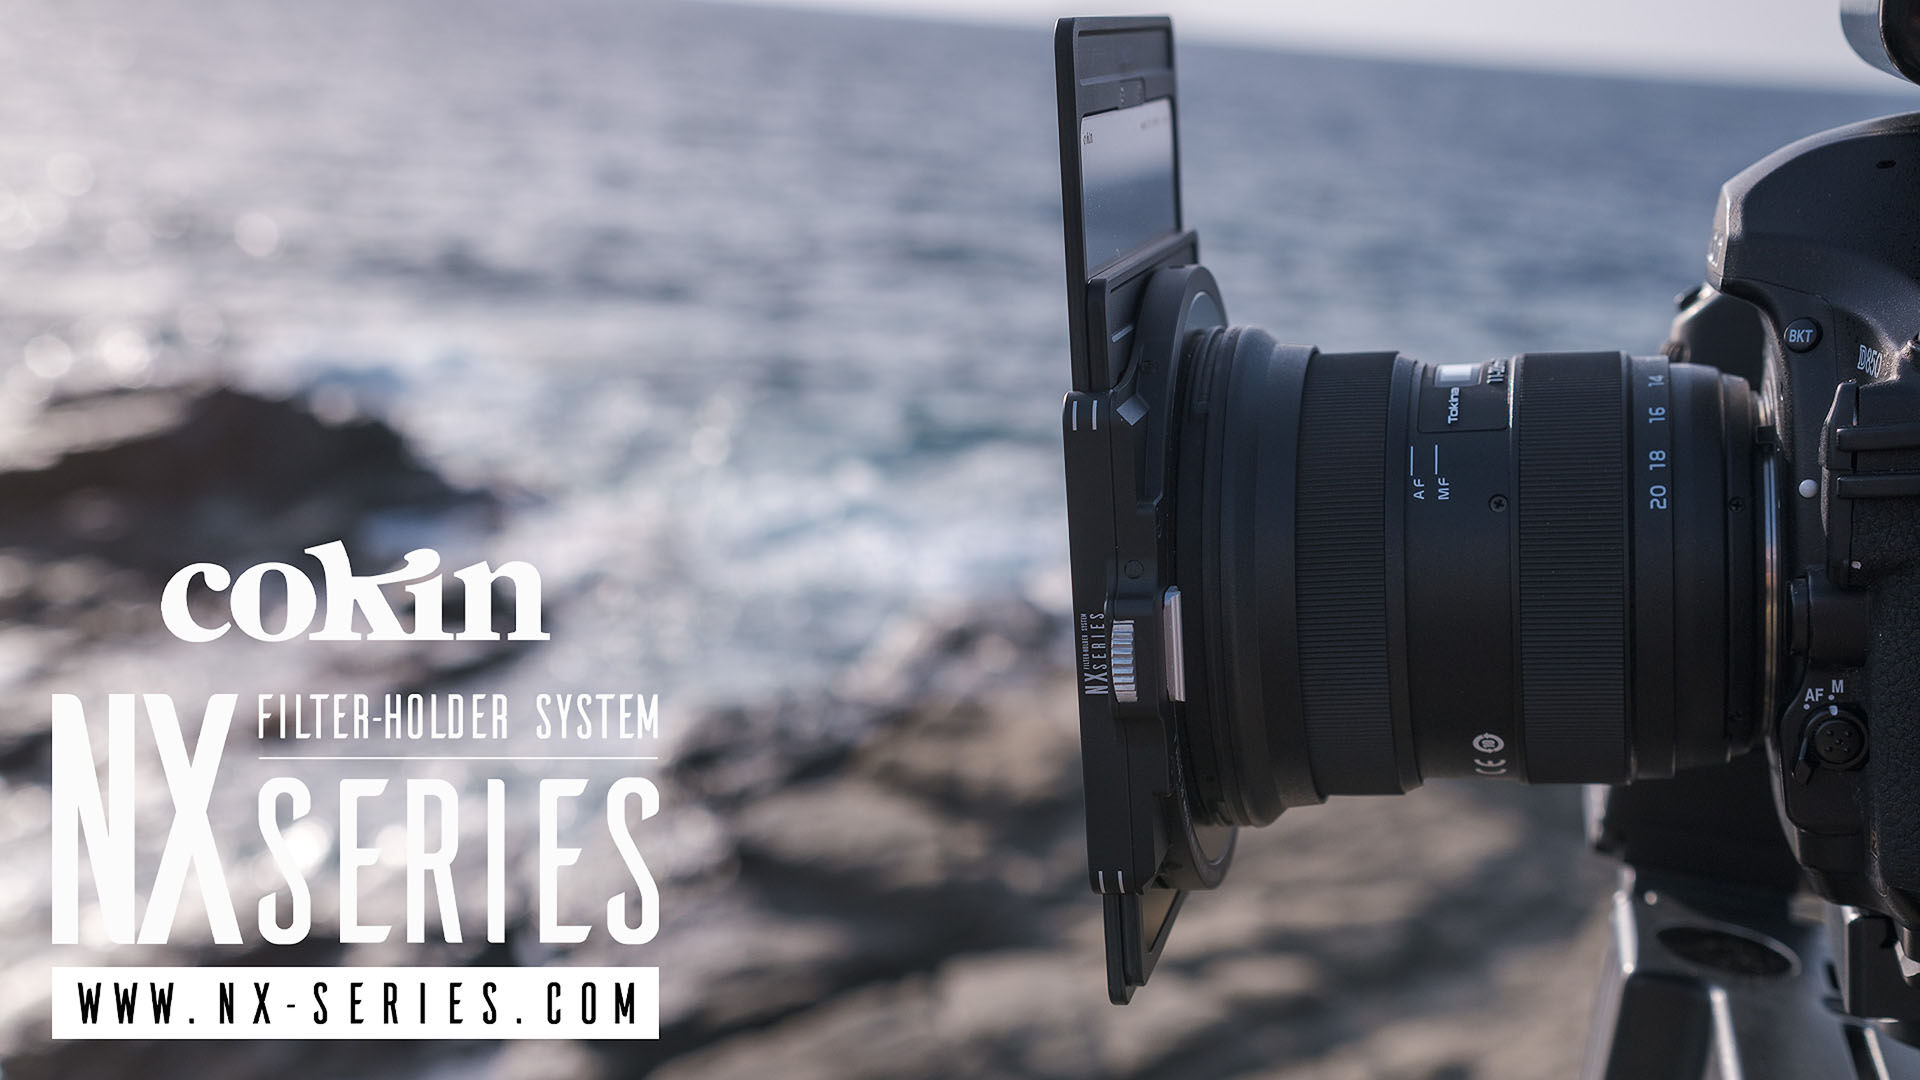 Cokin NX-Series Filter Holder System – New Commercial Video